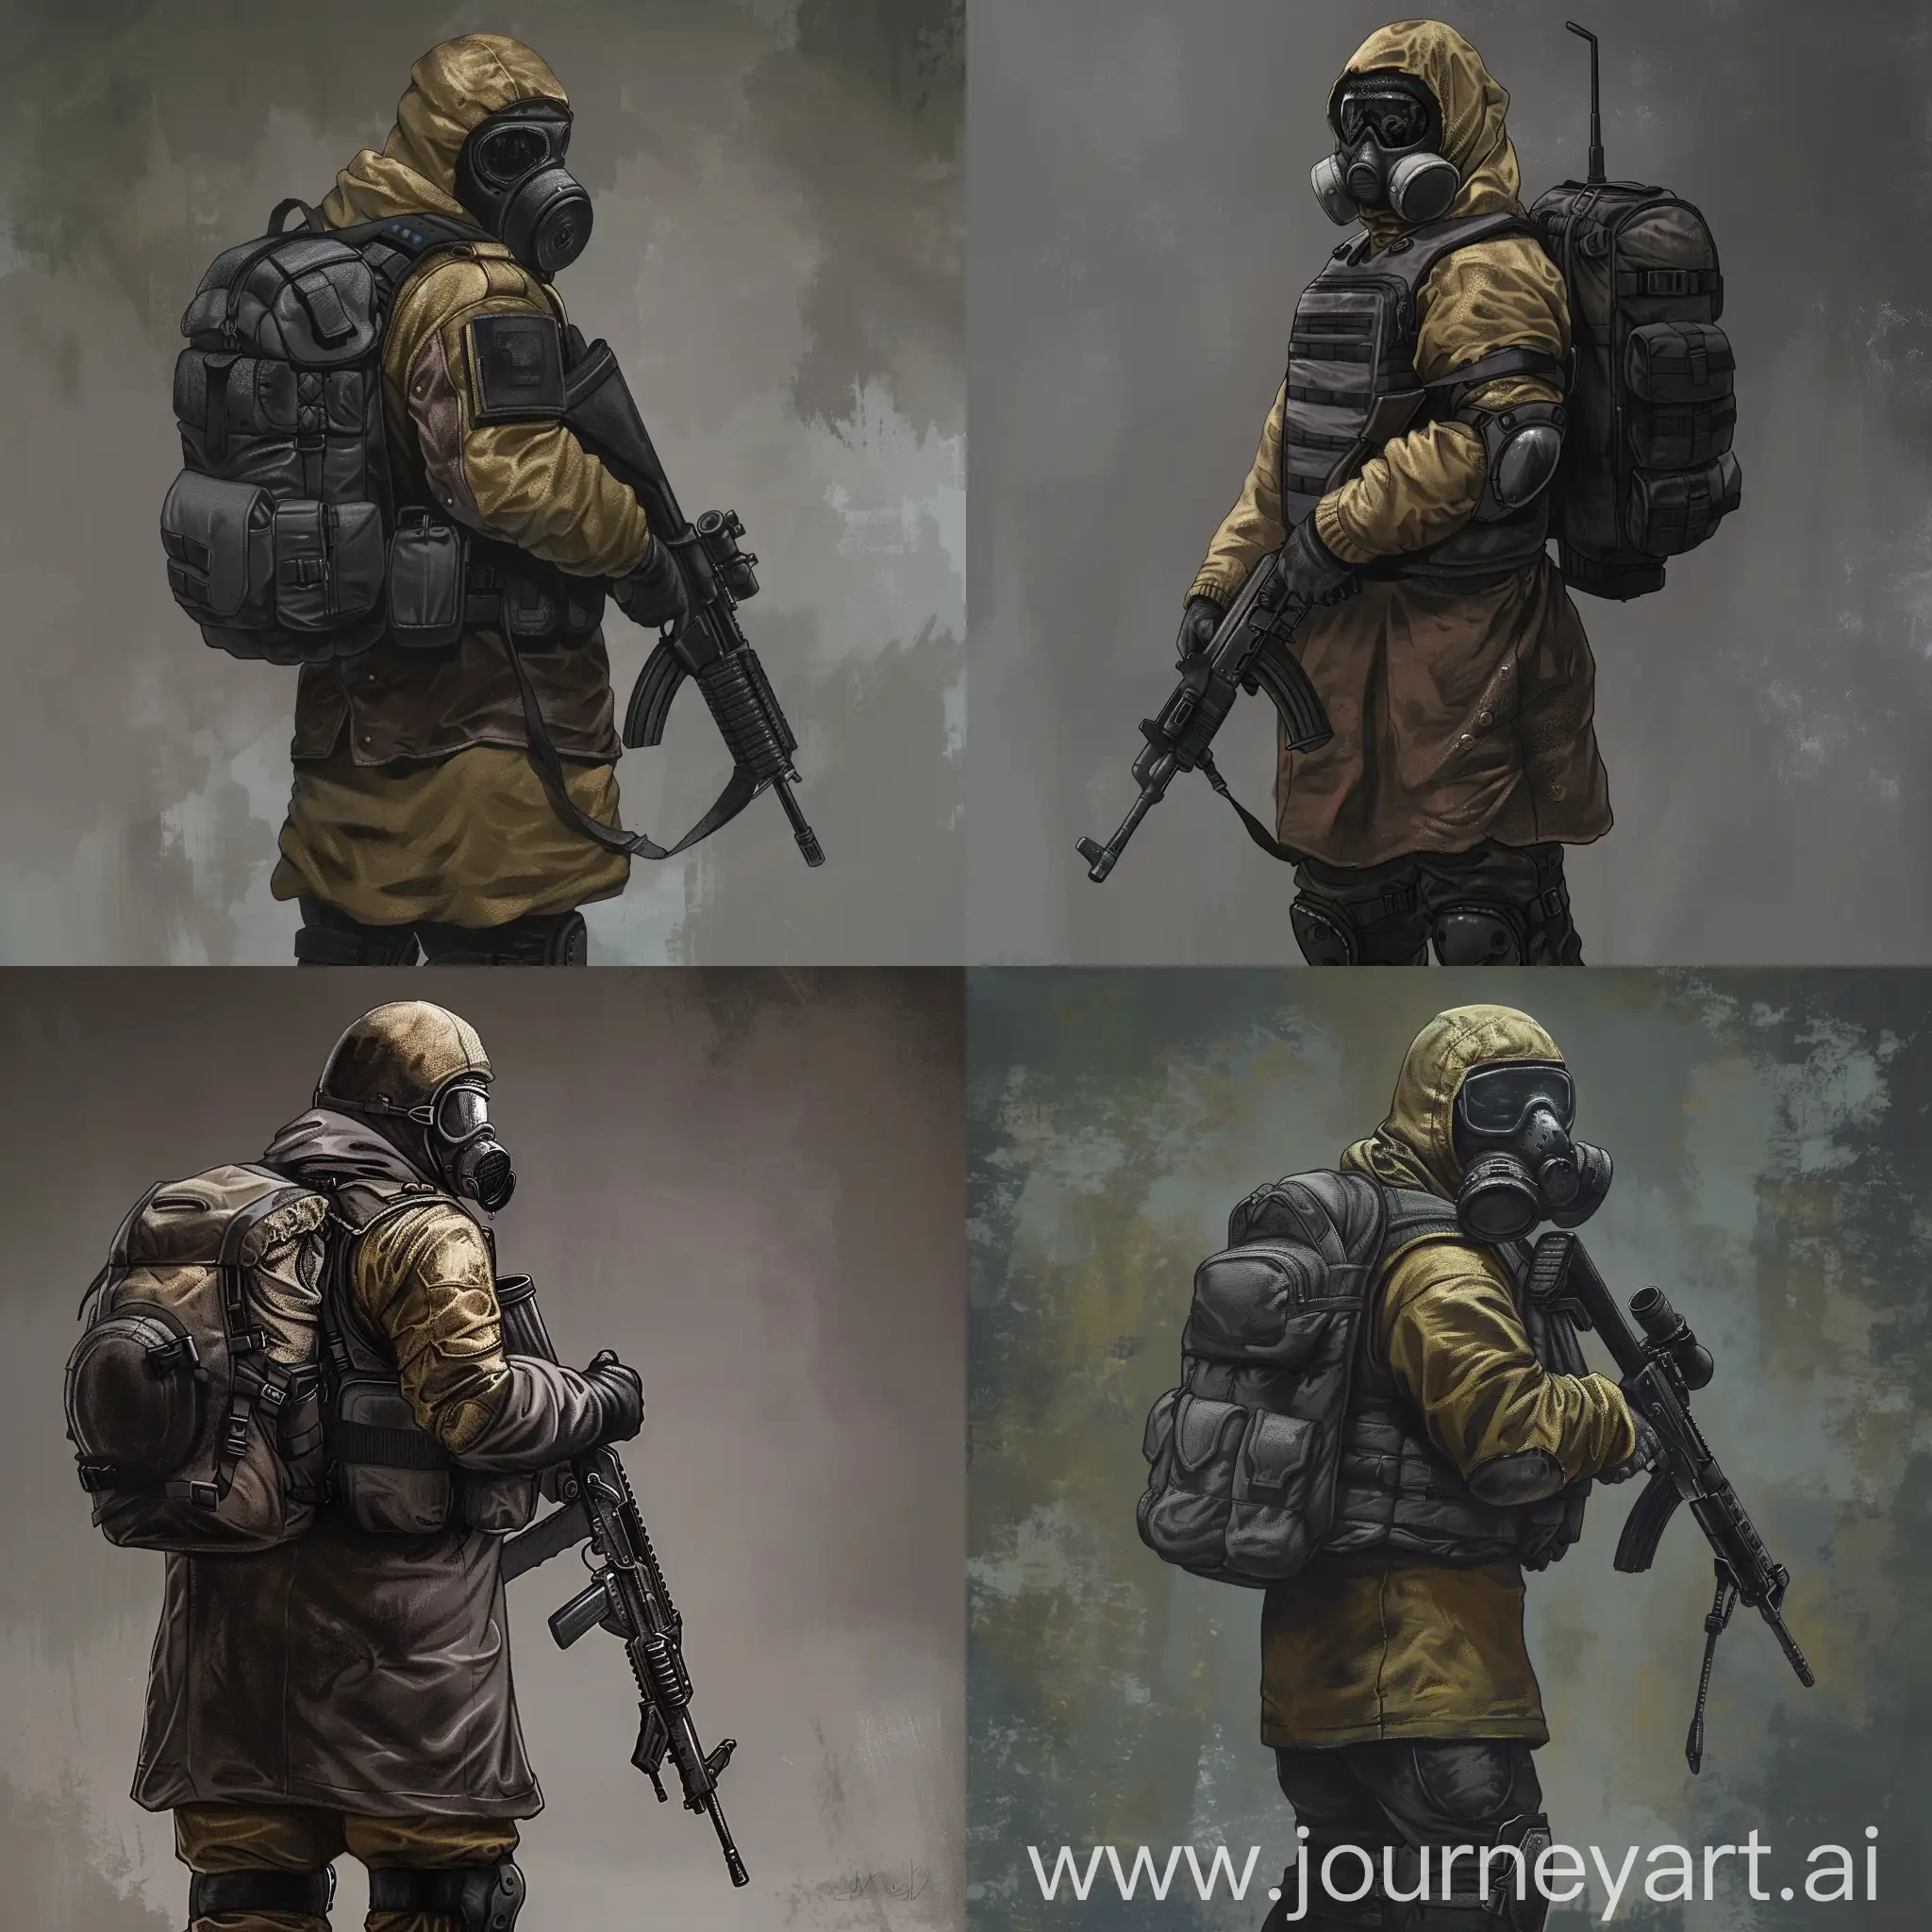 Digital  concept art a stalker from the universe of S.T.A.L.K.E.R., dressed in a dark brown military raincoat, gray military armor on his body, a gasmask on his face, a military backpack on his back, a rifle in his hands.